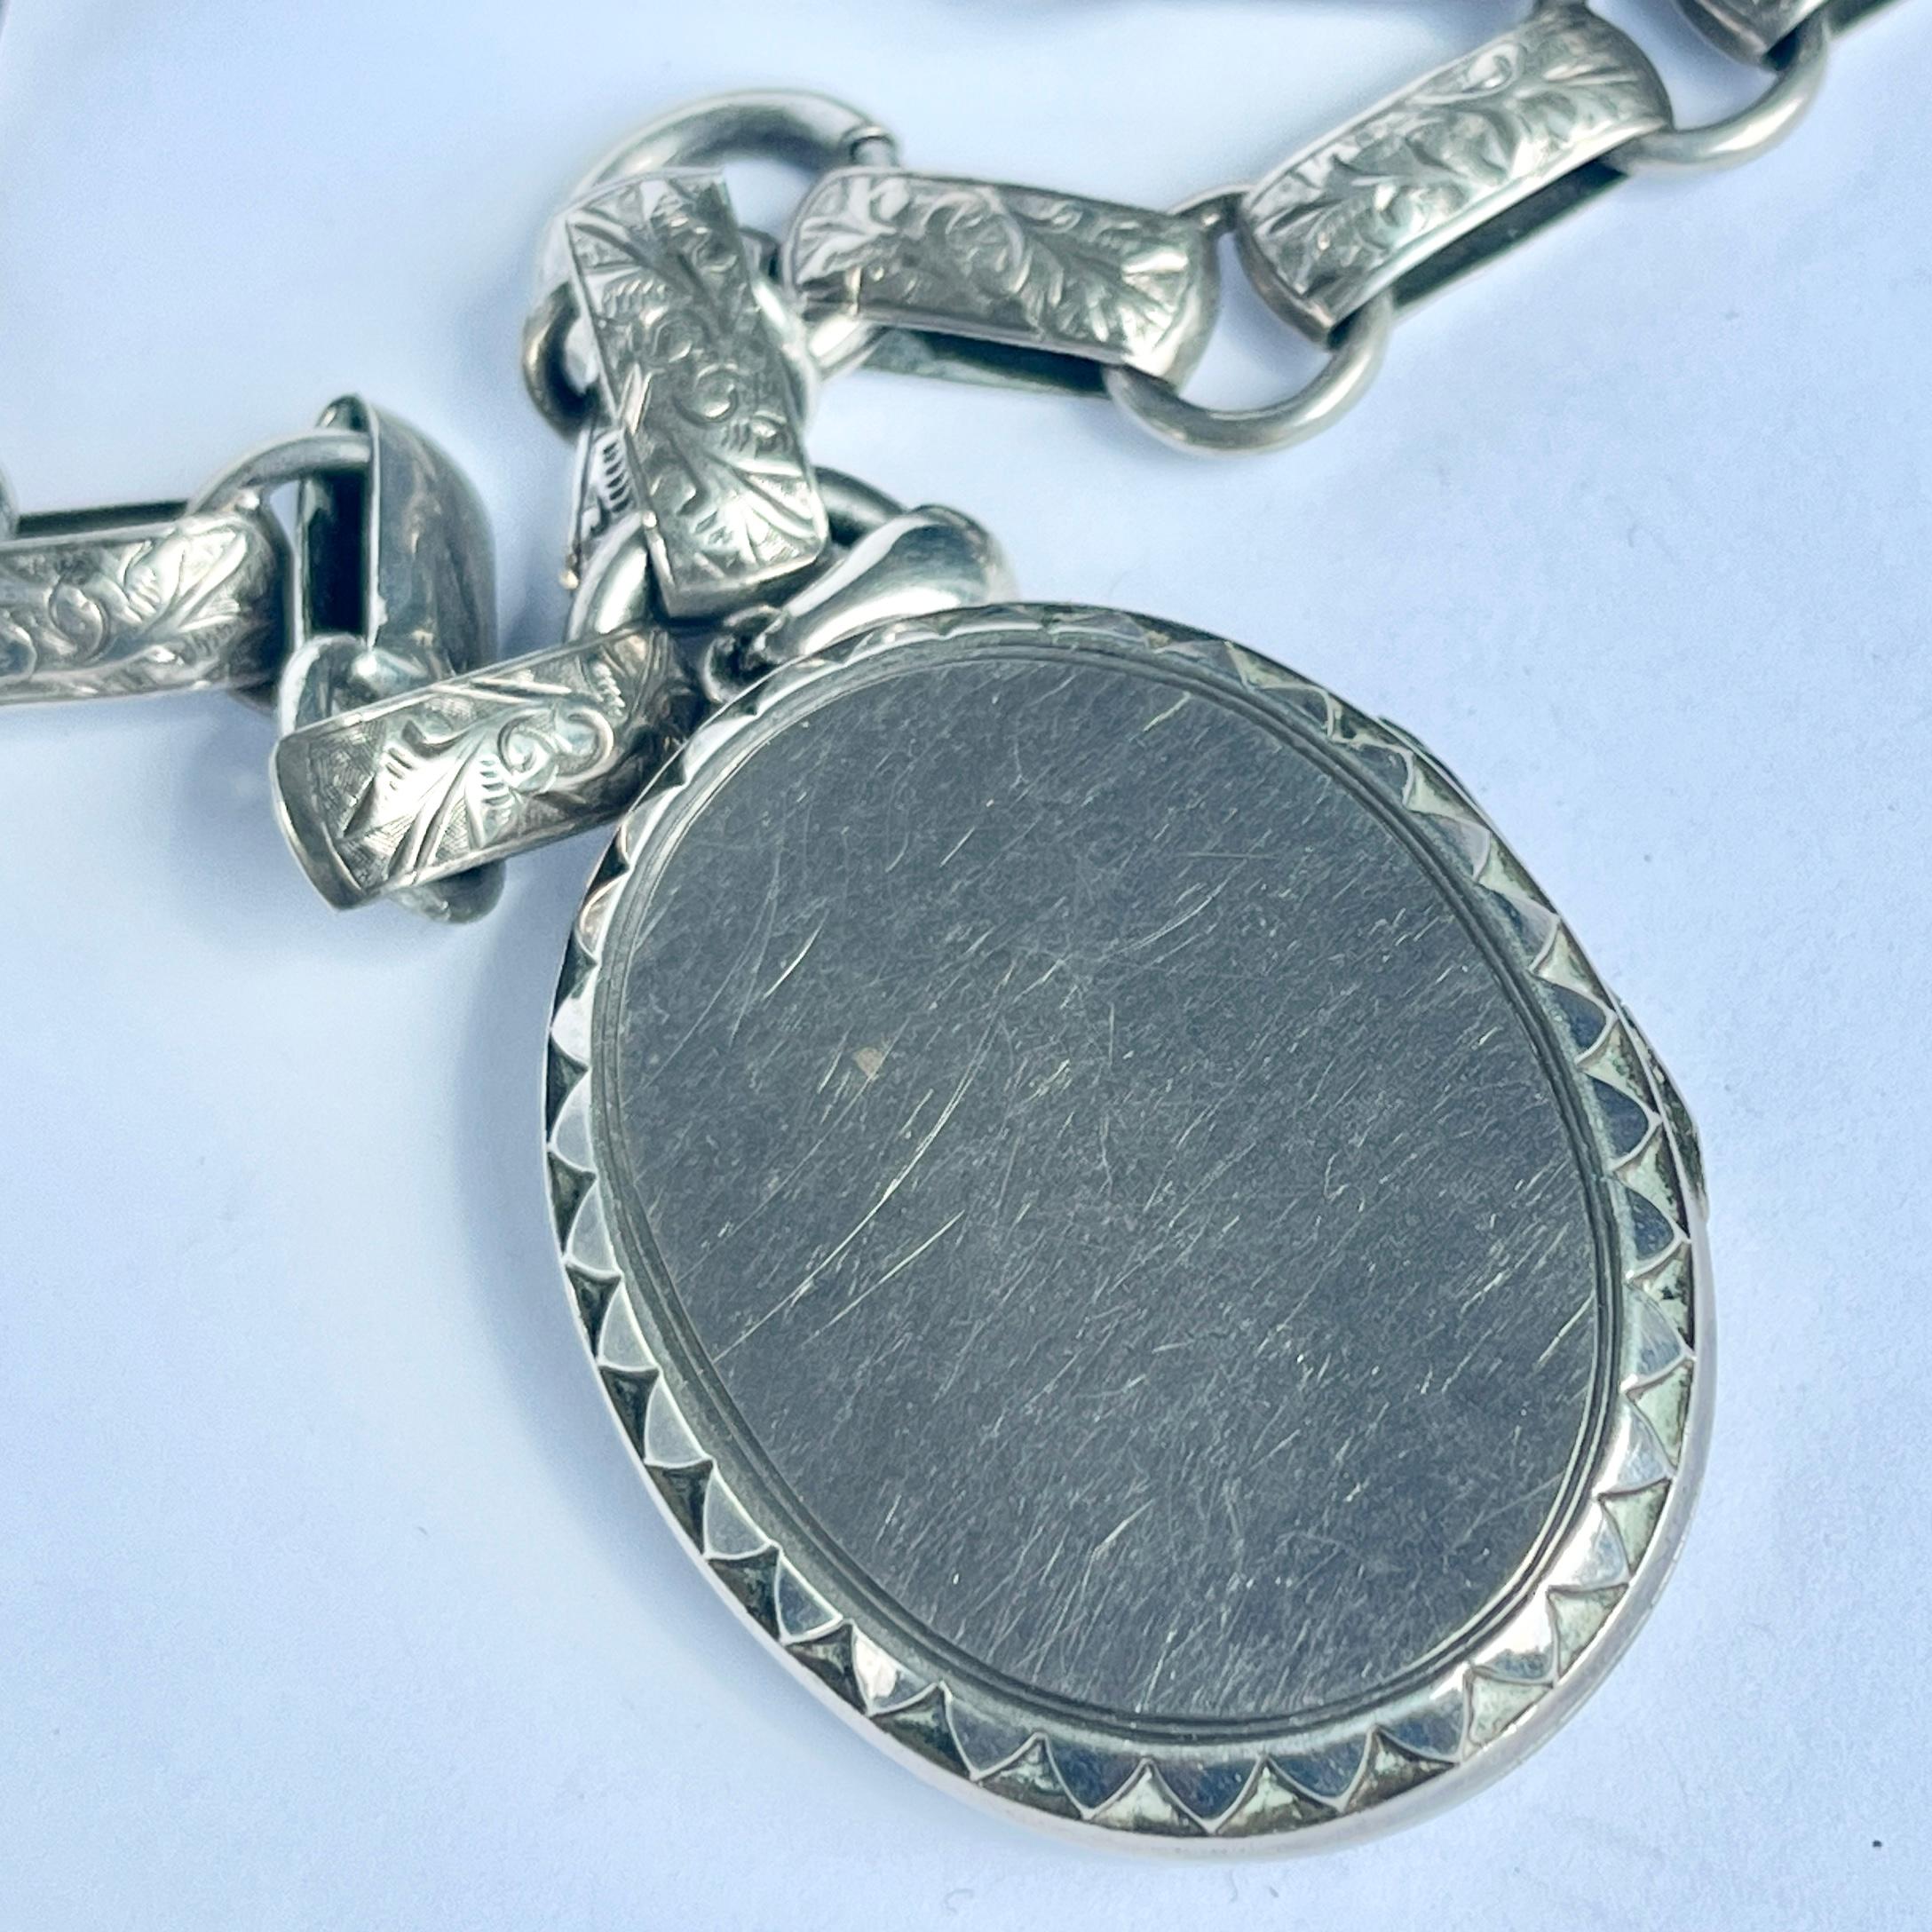 This locket has great detail on the front with engraving and raised lines of silver. The engraving features leaves and vines. The inside is left empty for your treasures. The necklace has two bolt clasps so can be made slightly shorter and you can